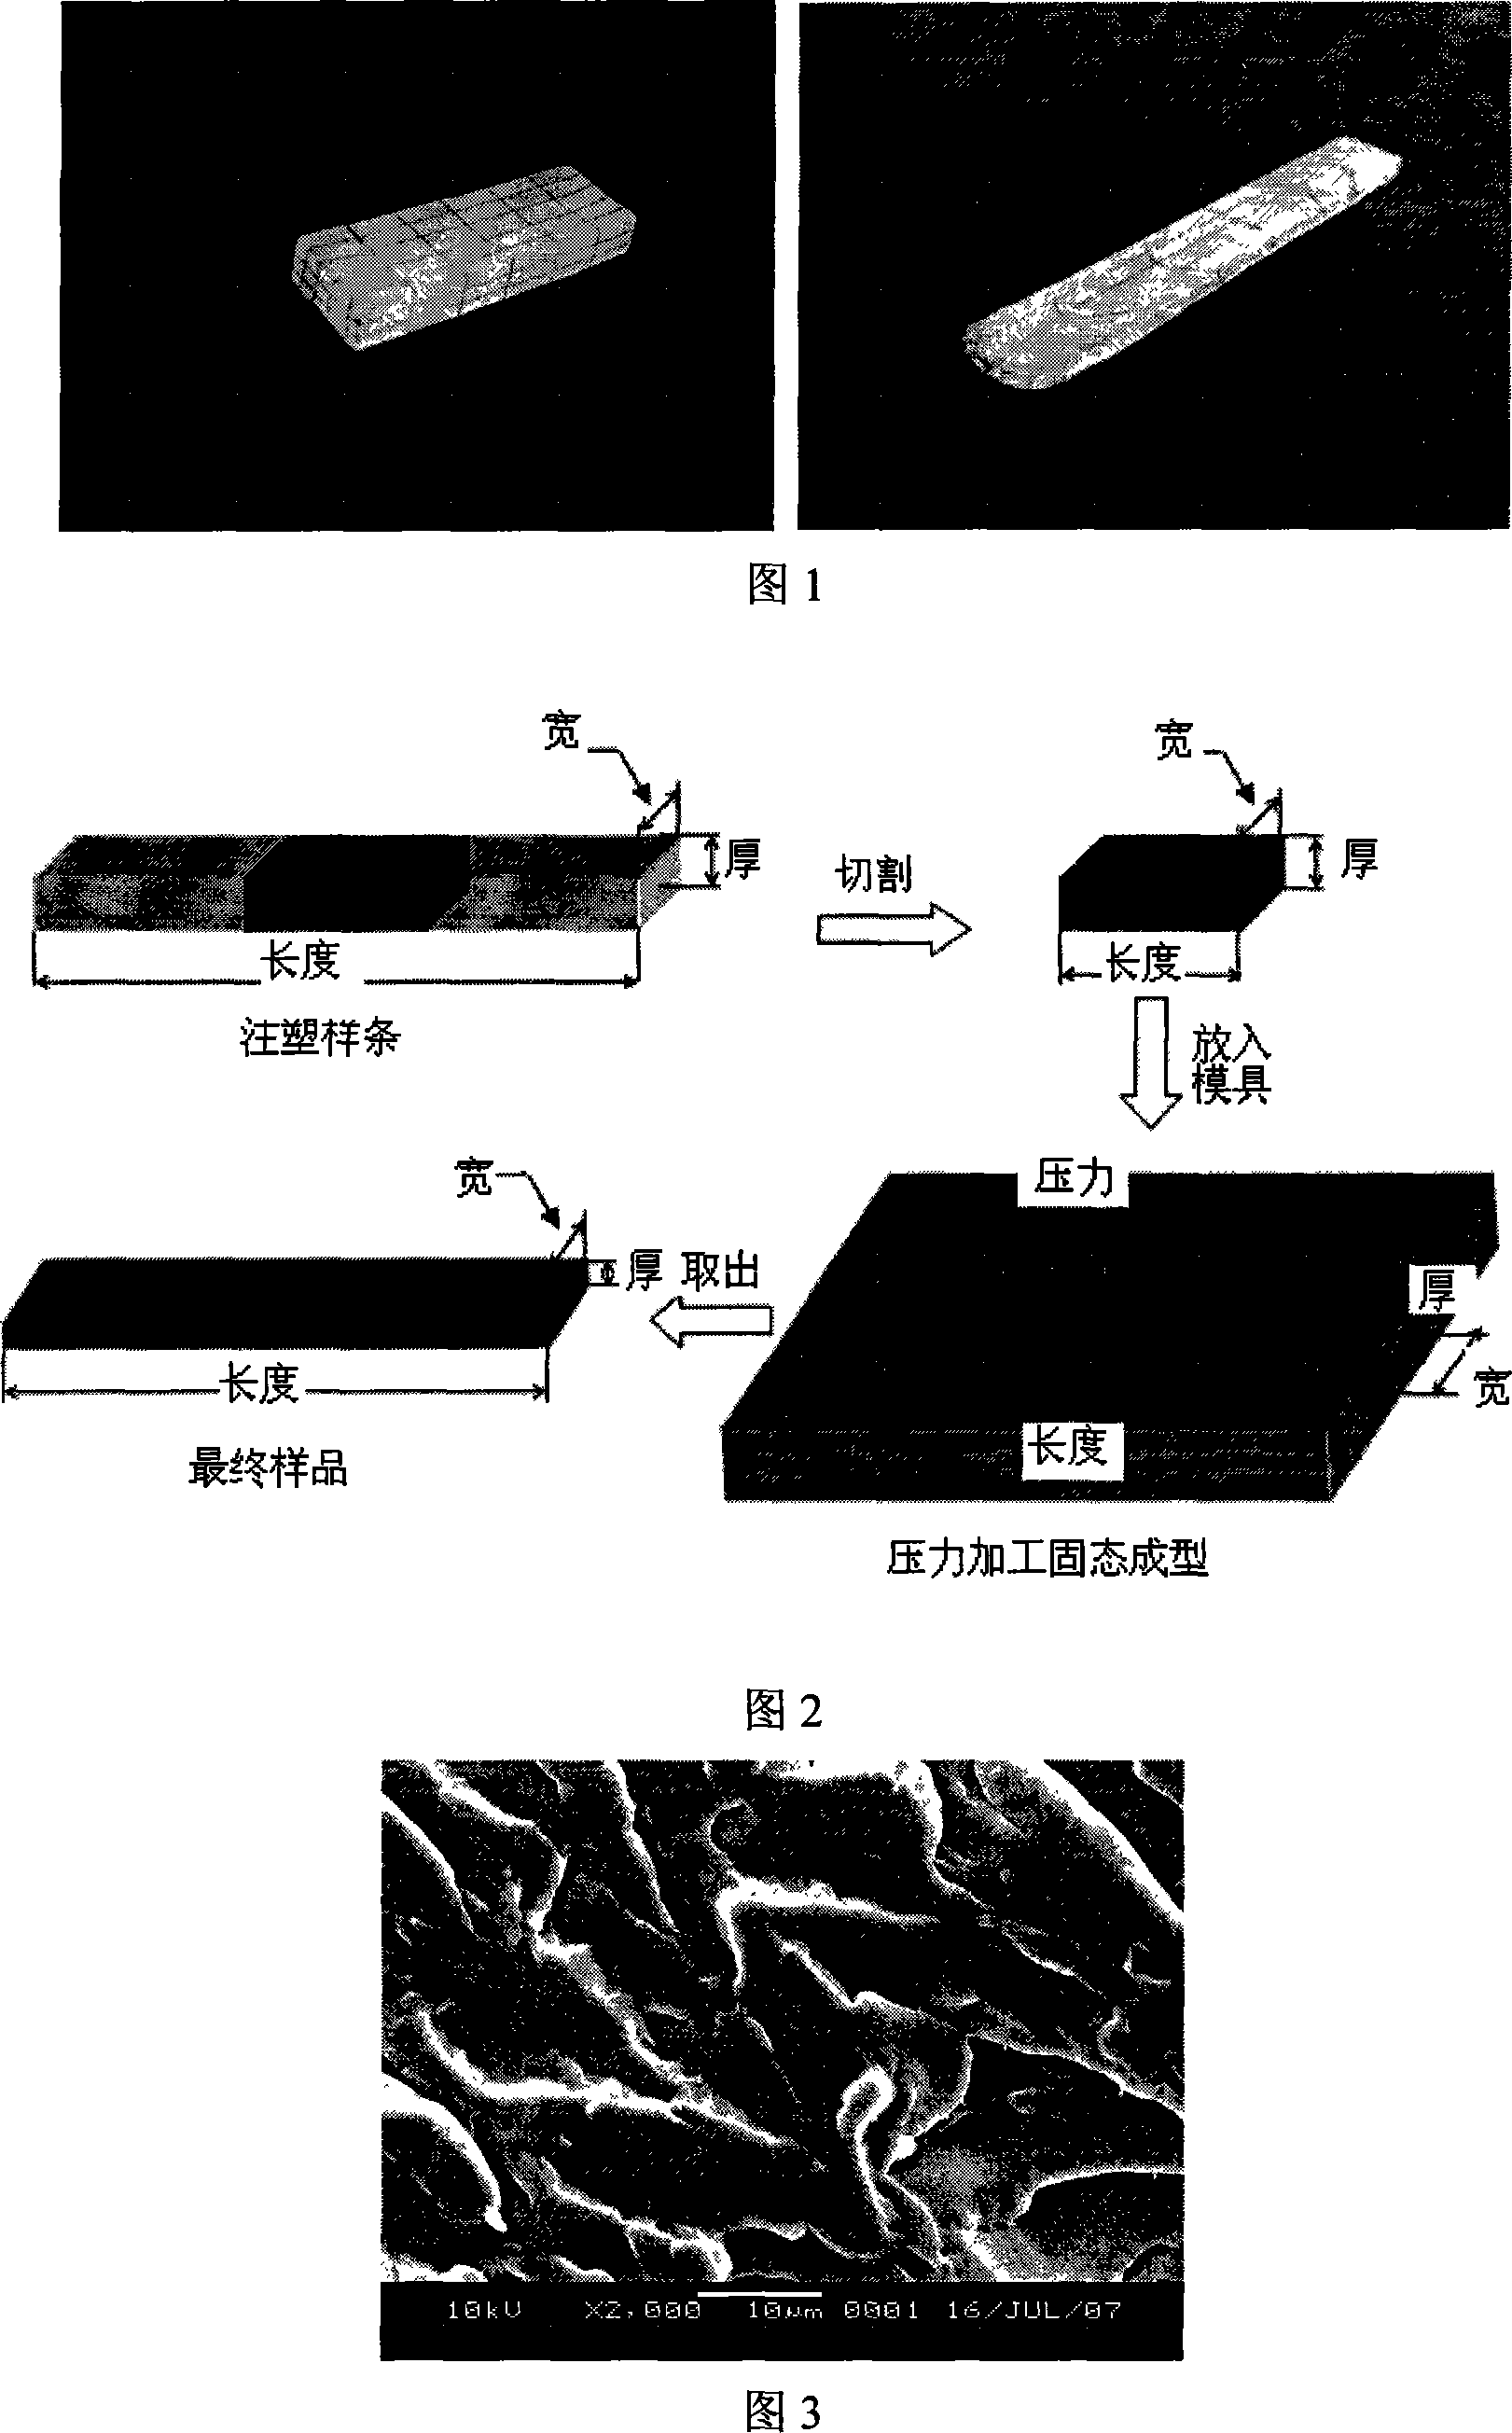 Method for improving polyglycol plasticization polylactic acid strength of materials capability by process